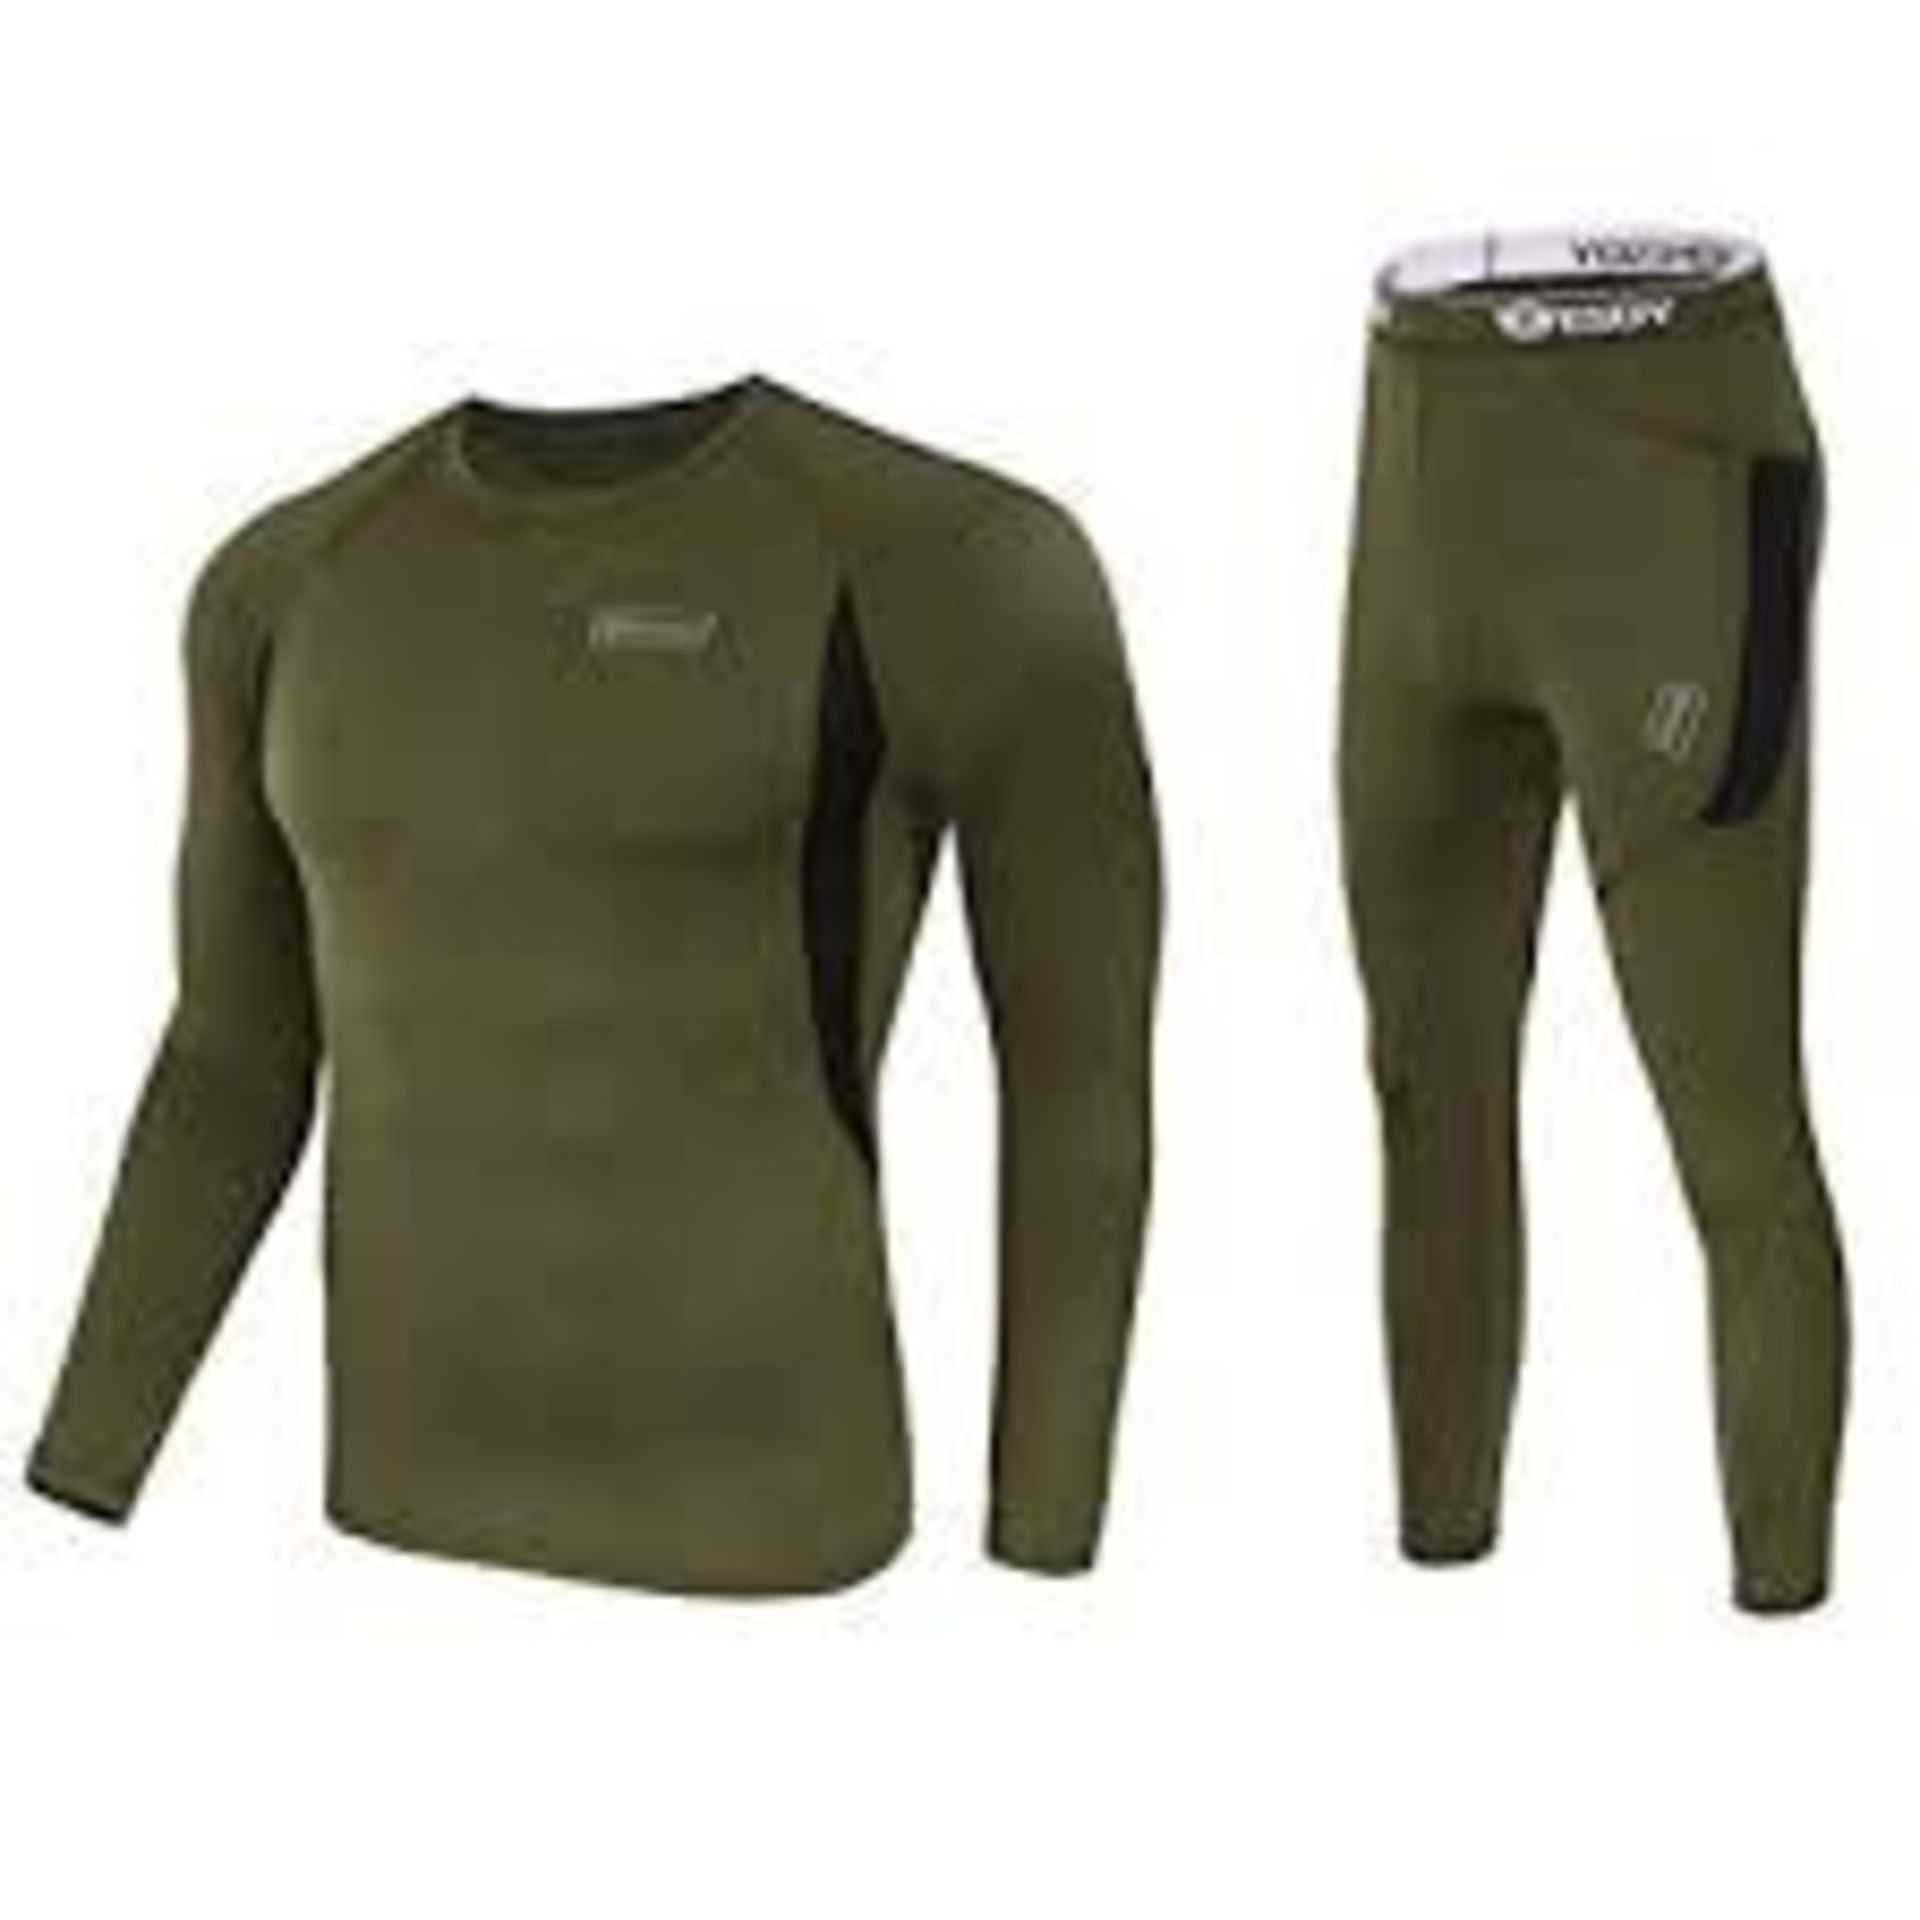 Brand New ESDY Black and Khaki Thermal Gents Under Garments